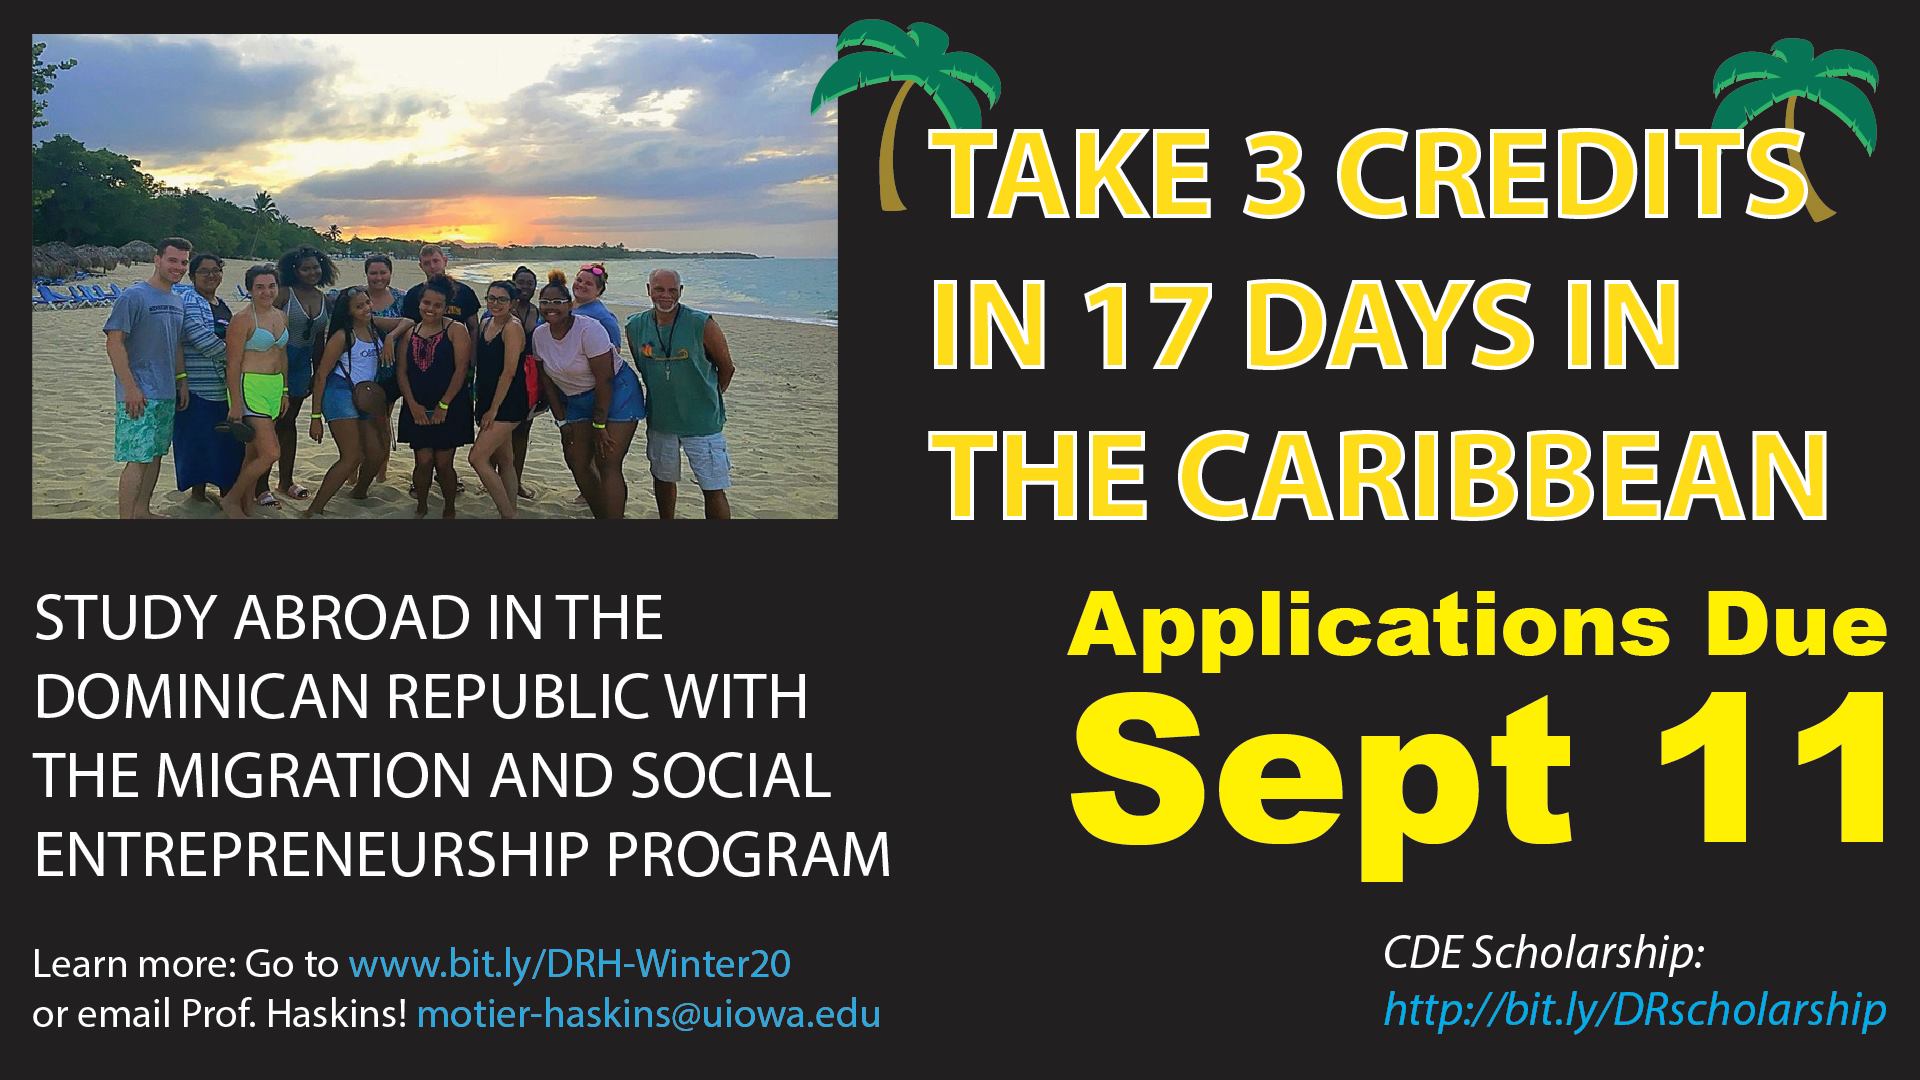 Take 3 credits in 17 days in the Caribbean